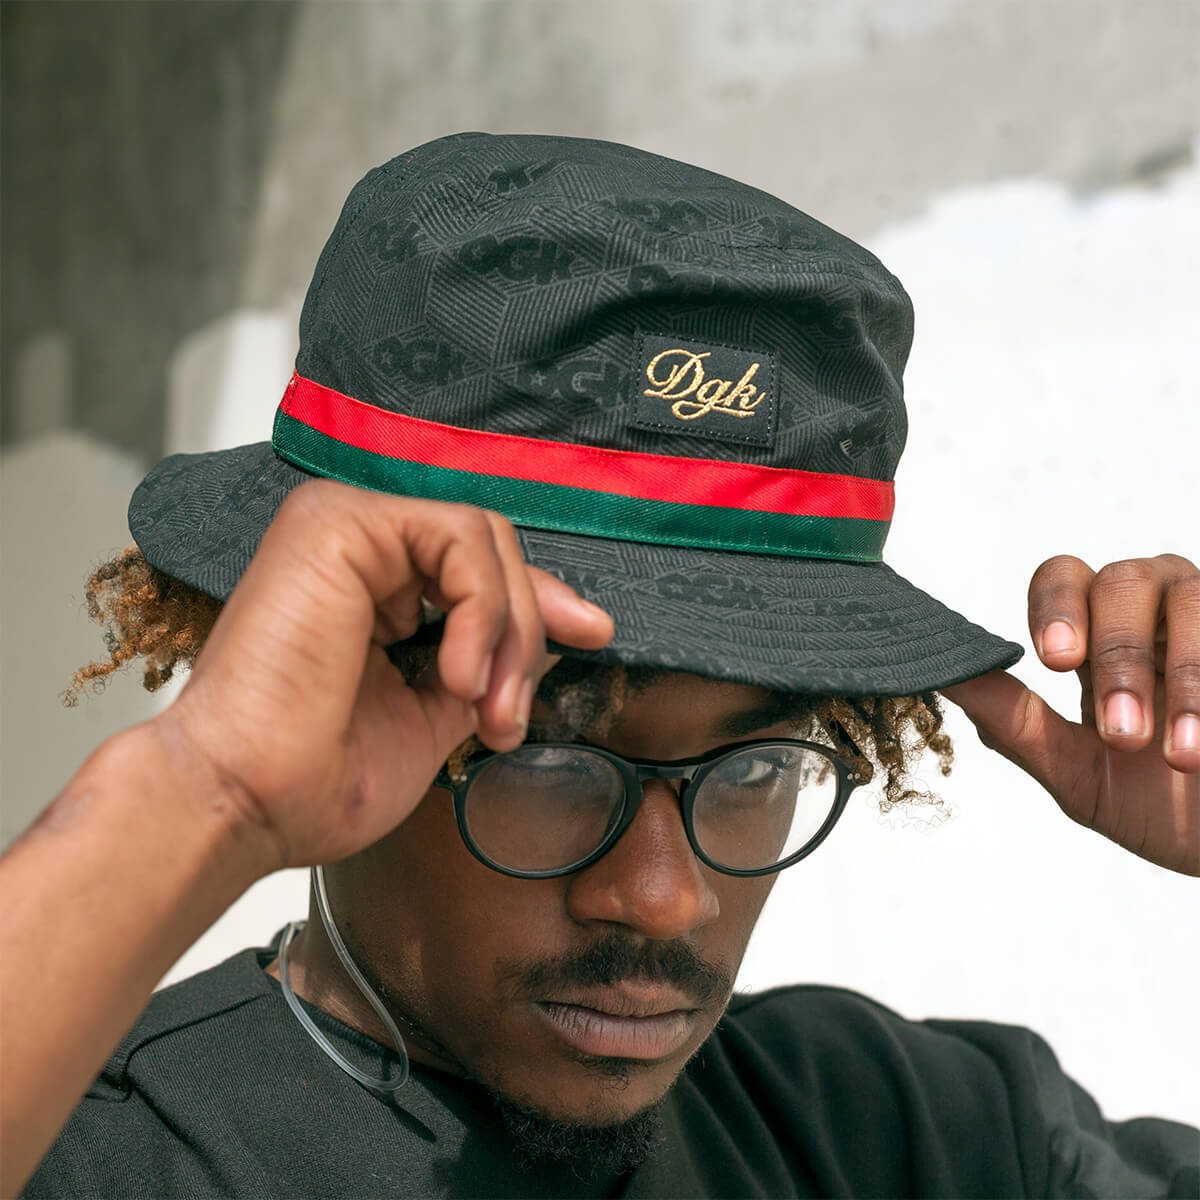 NEW BUCKET HATS FEATURING DGK & MORE - SHOP HATS NOW